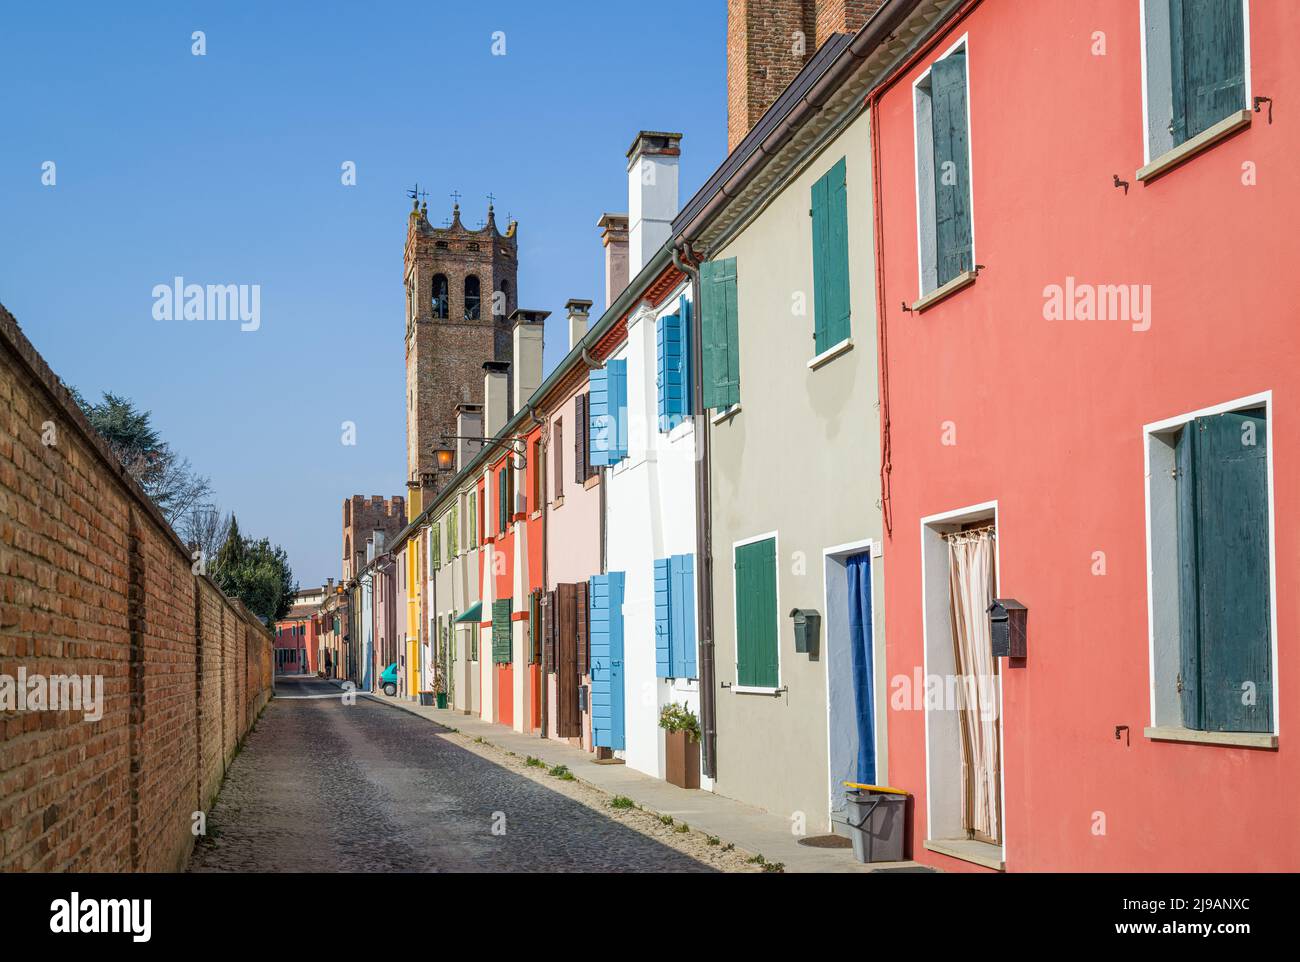 Italy, Montagnana,traditional colorful houses leaning against the ancient medieval walls that surround the town Stock Photo